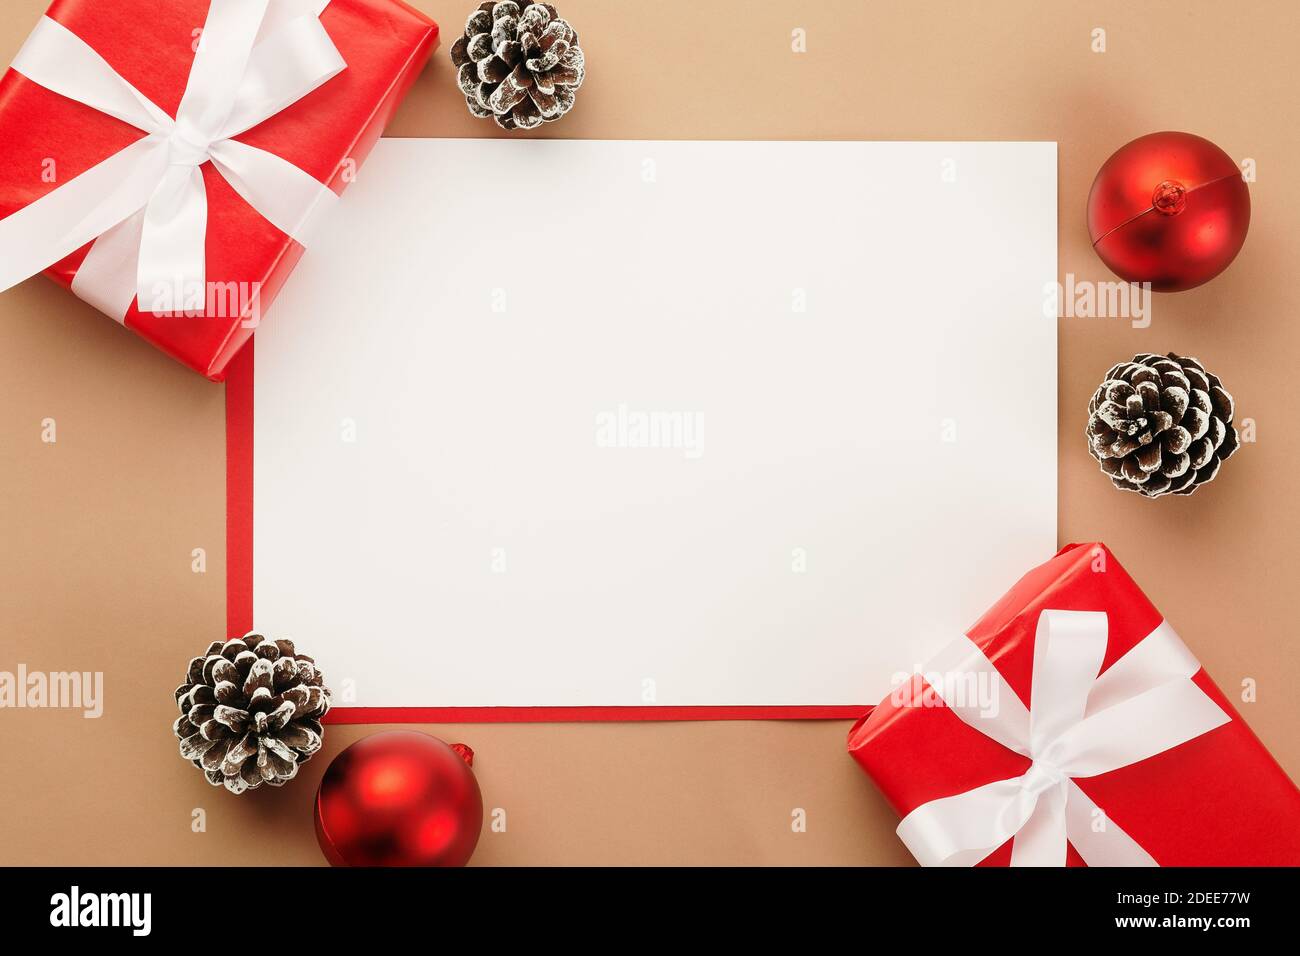 Merry christmas greeting card mockup template with christmas gifts  decorations Stock Photo - Alamy